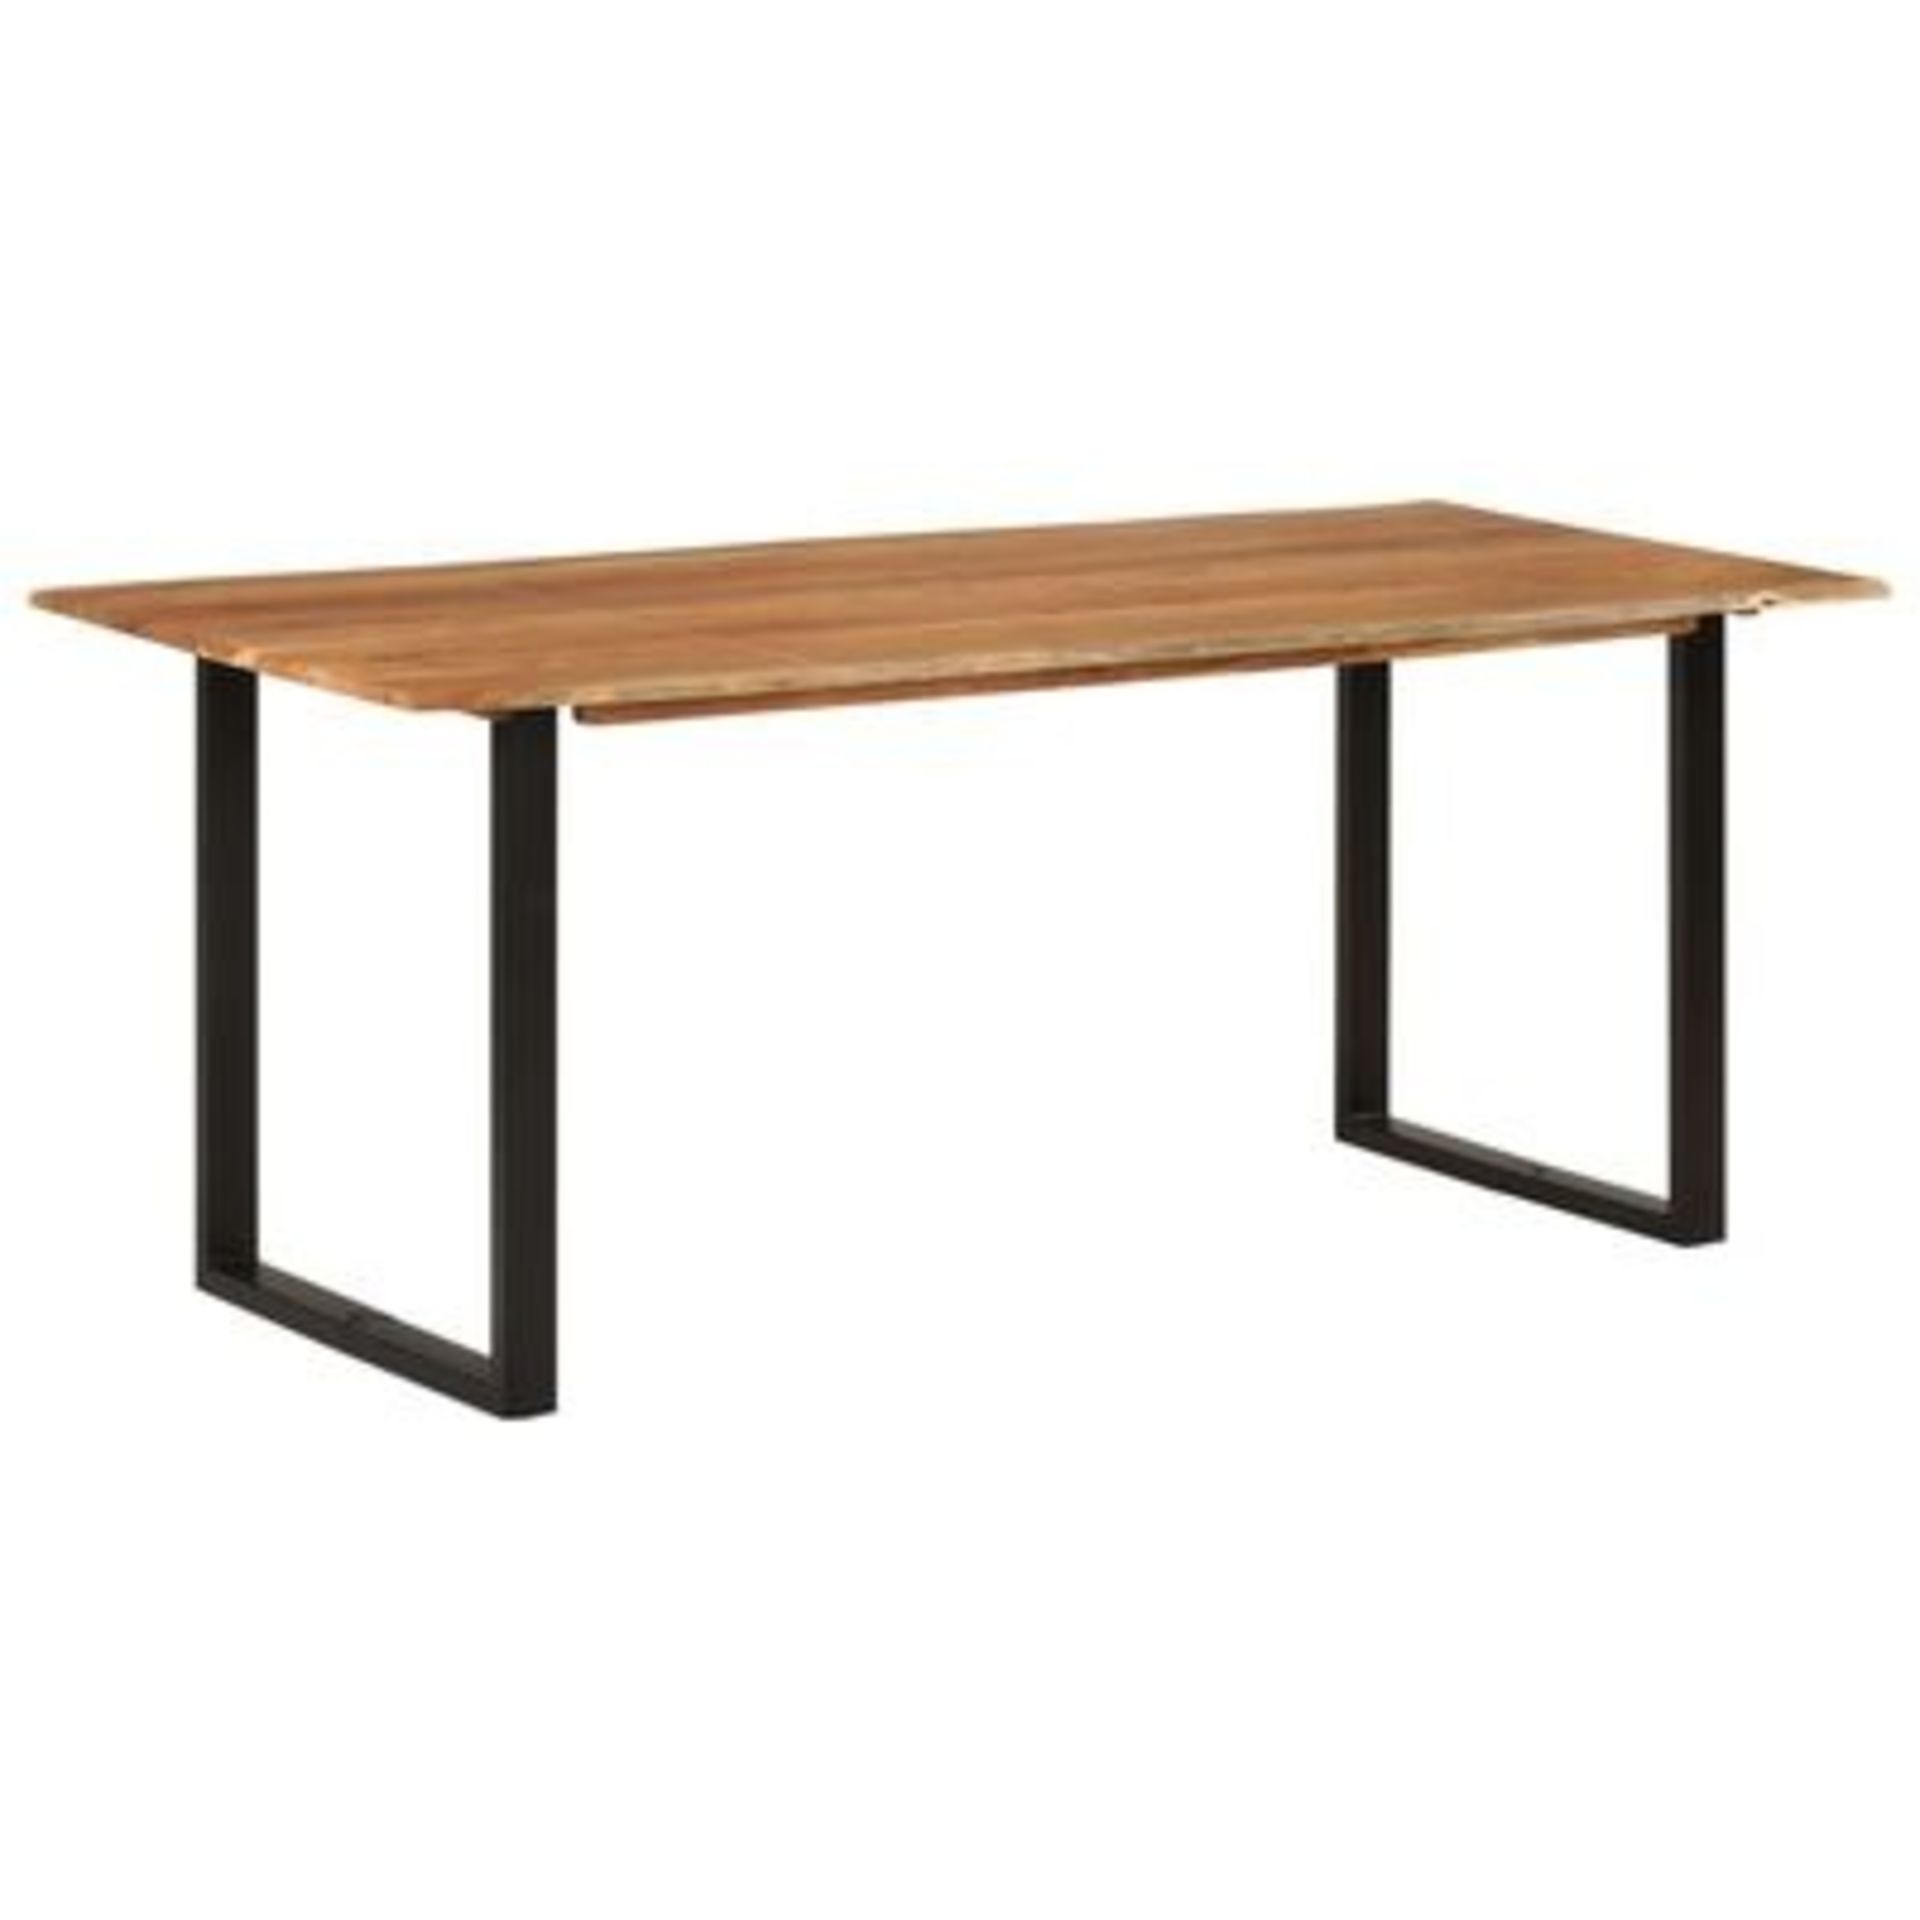 Large Table with metal legs - ER48